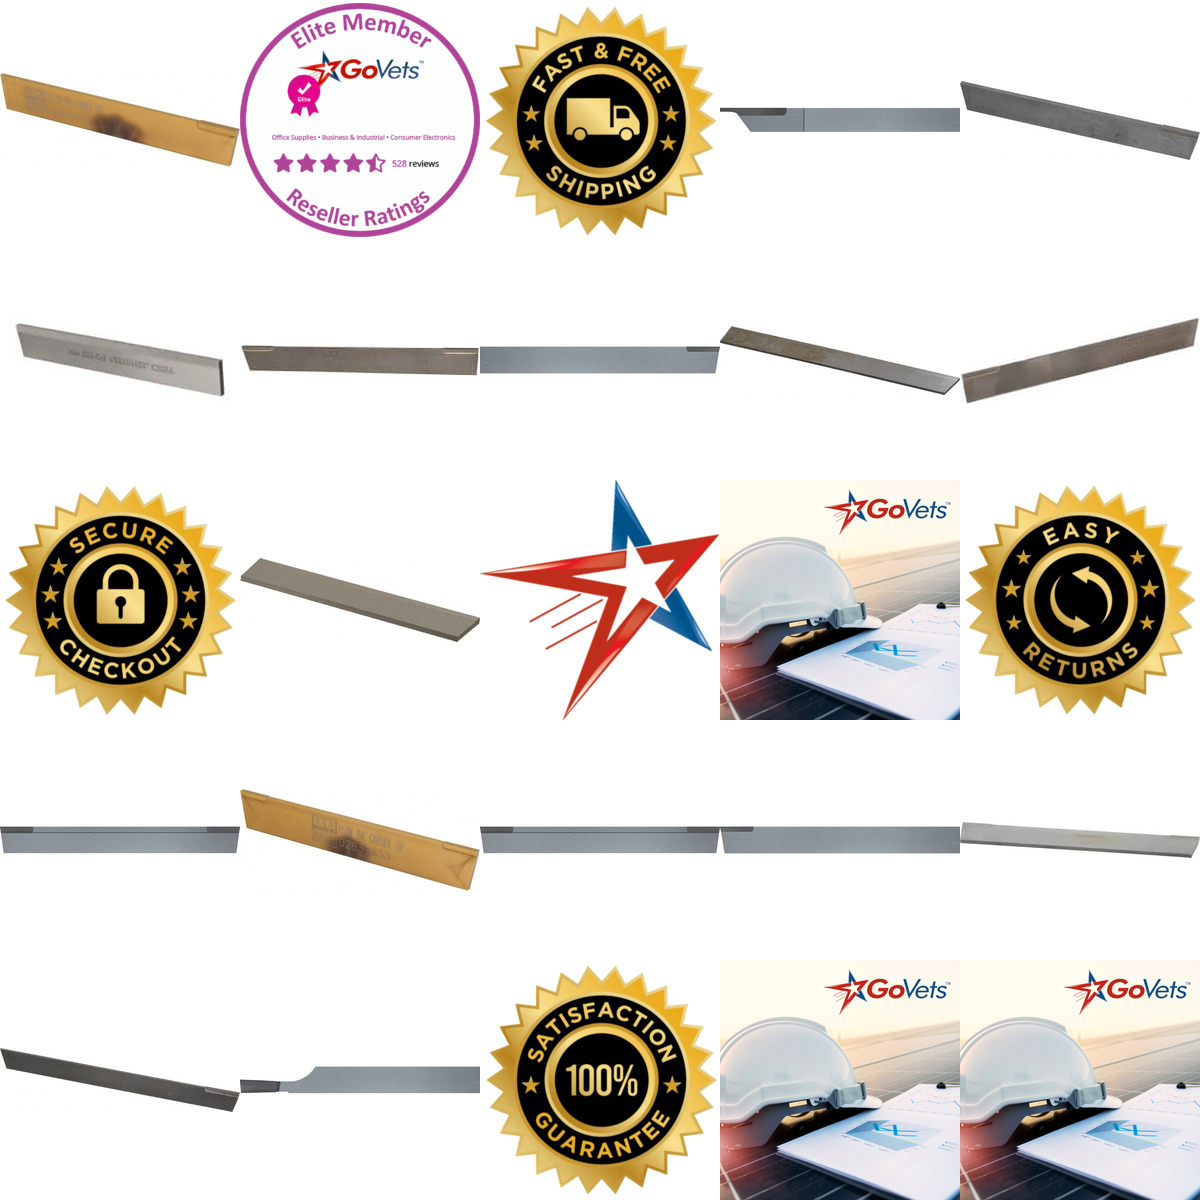 A selection of Cut Off Blades and Holders products on GoVets